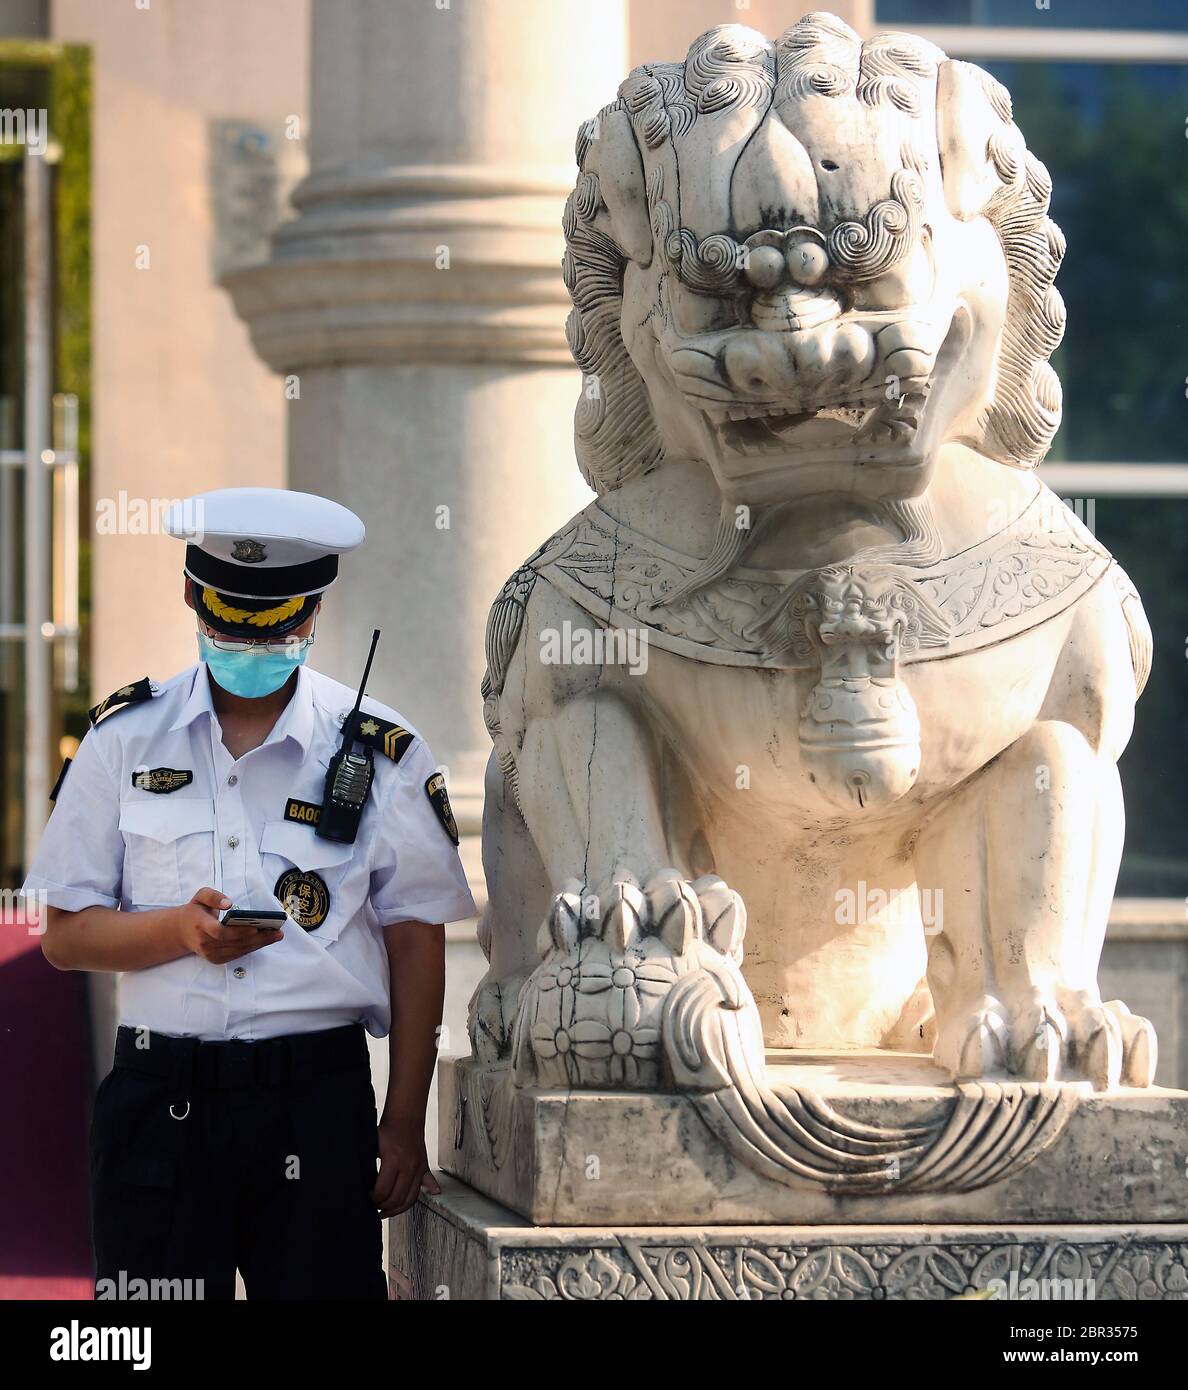 Beijing, China. 20th May, 2020. A Chinese government security guard uses his phone next to a traditional 'Guardian Lion' placed outside a bank in Beijing on Wednesday, May 20, 2020. Wuhan, a city of 11 million, where the Covid-19 pandemic originated, reported new cases over the weekend, its first new infections in over a month. China is aggressively investigating the new cluster, announcing a plan to test the entire city in 10 days. Photo by Stephen Shaver/UPI Credit: UPI/Alamy Live News Stock Photo